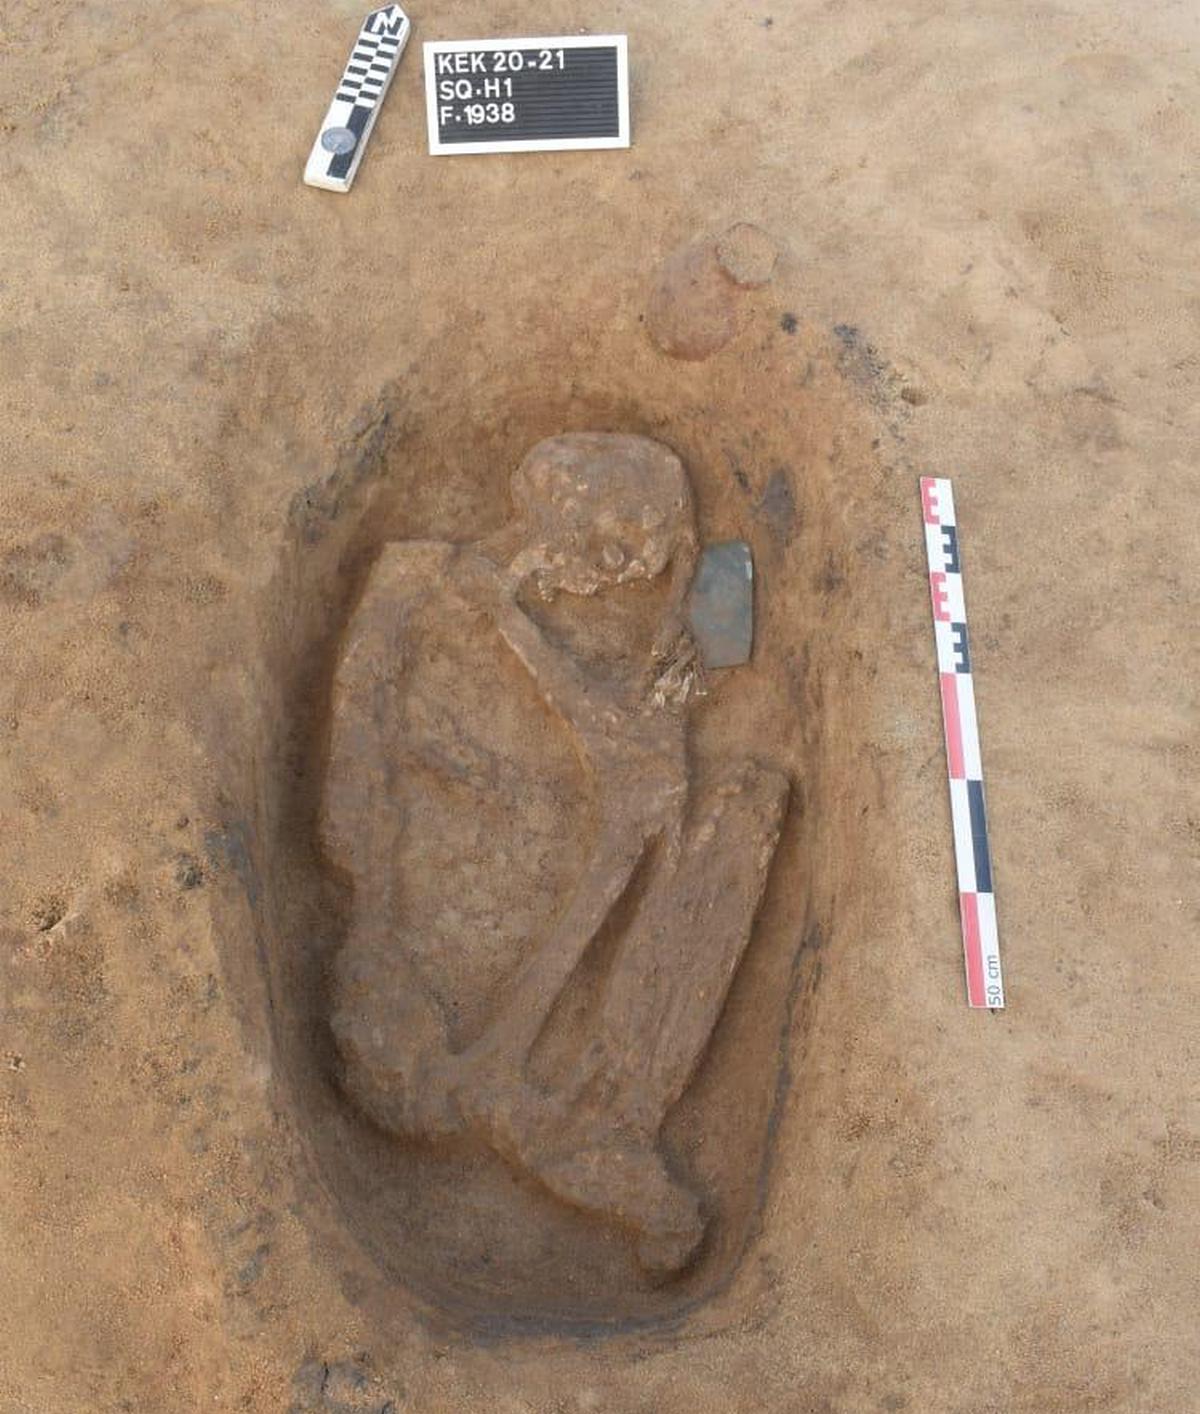 In Egypt, a large-scale archaeological discovery - the discovery of 110 tombs